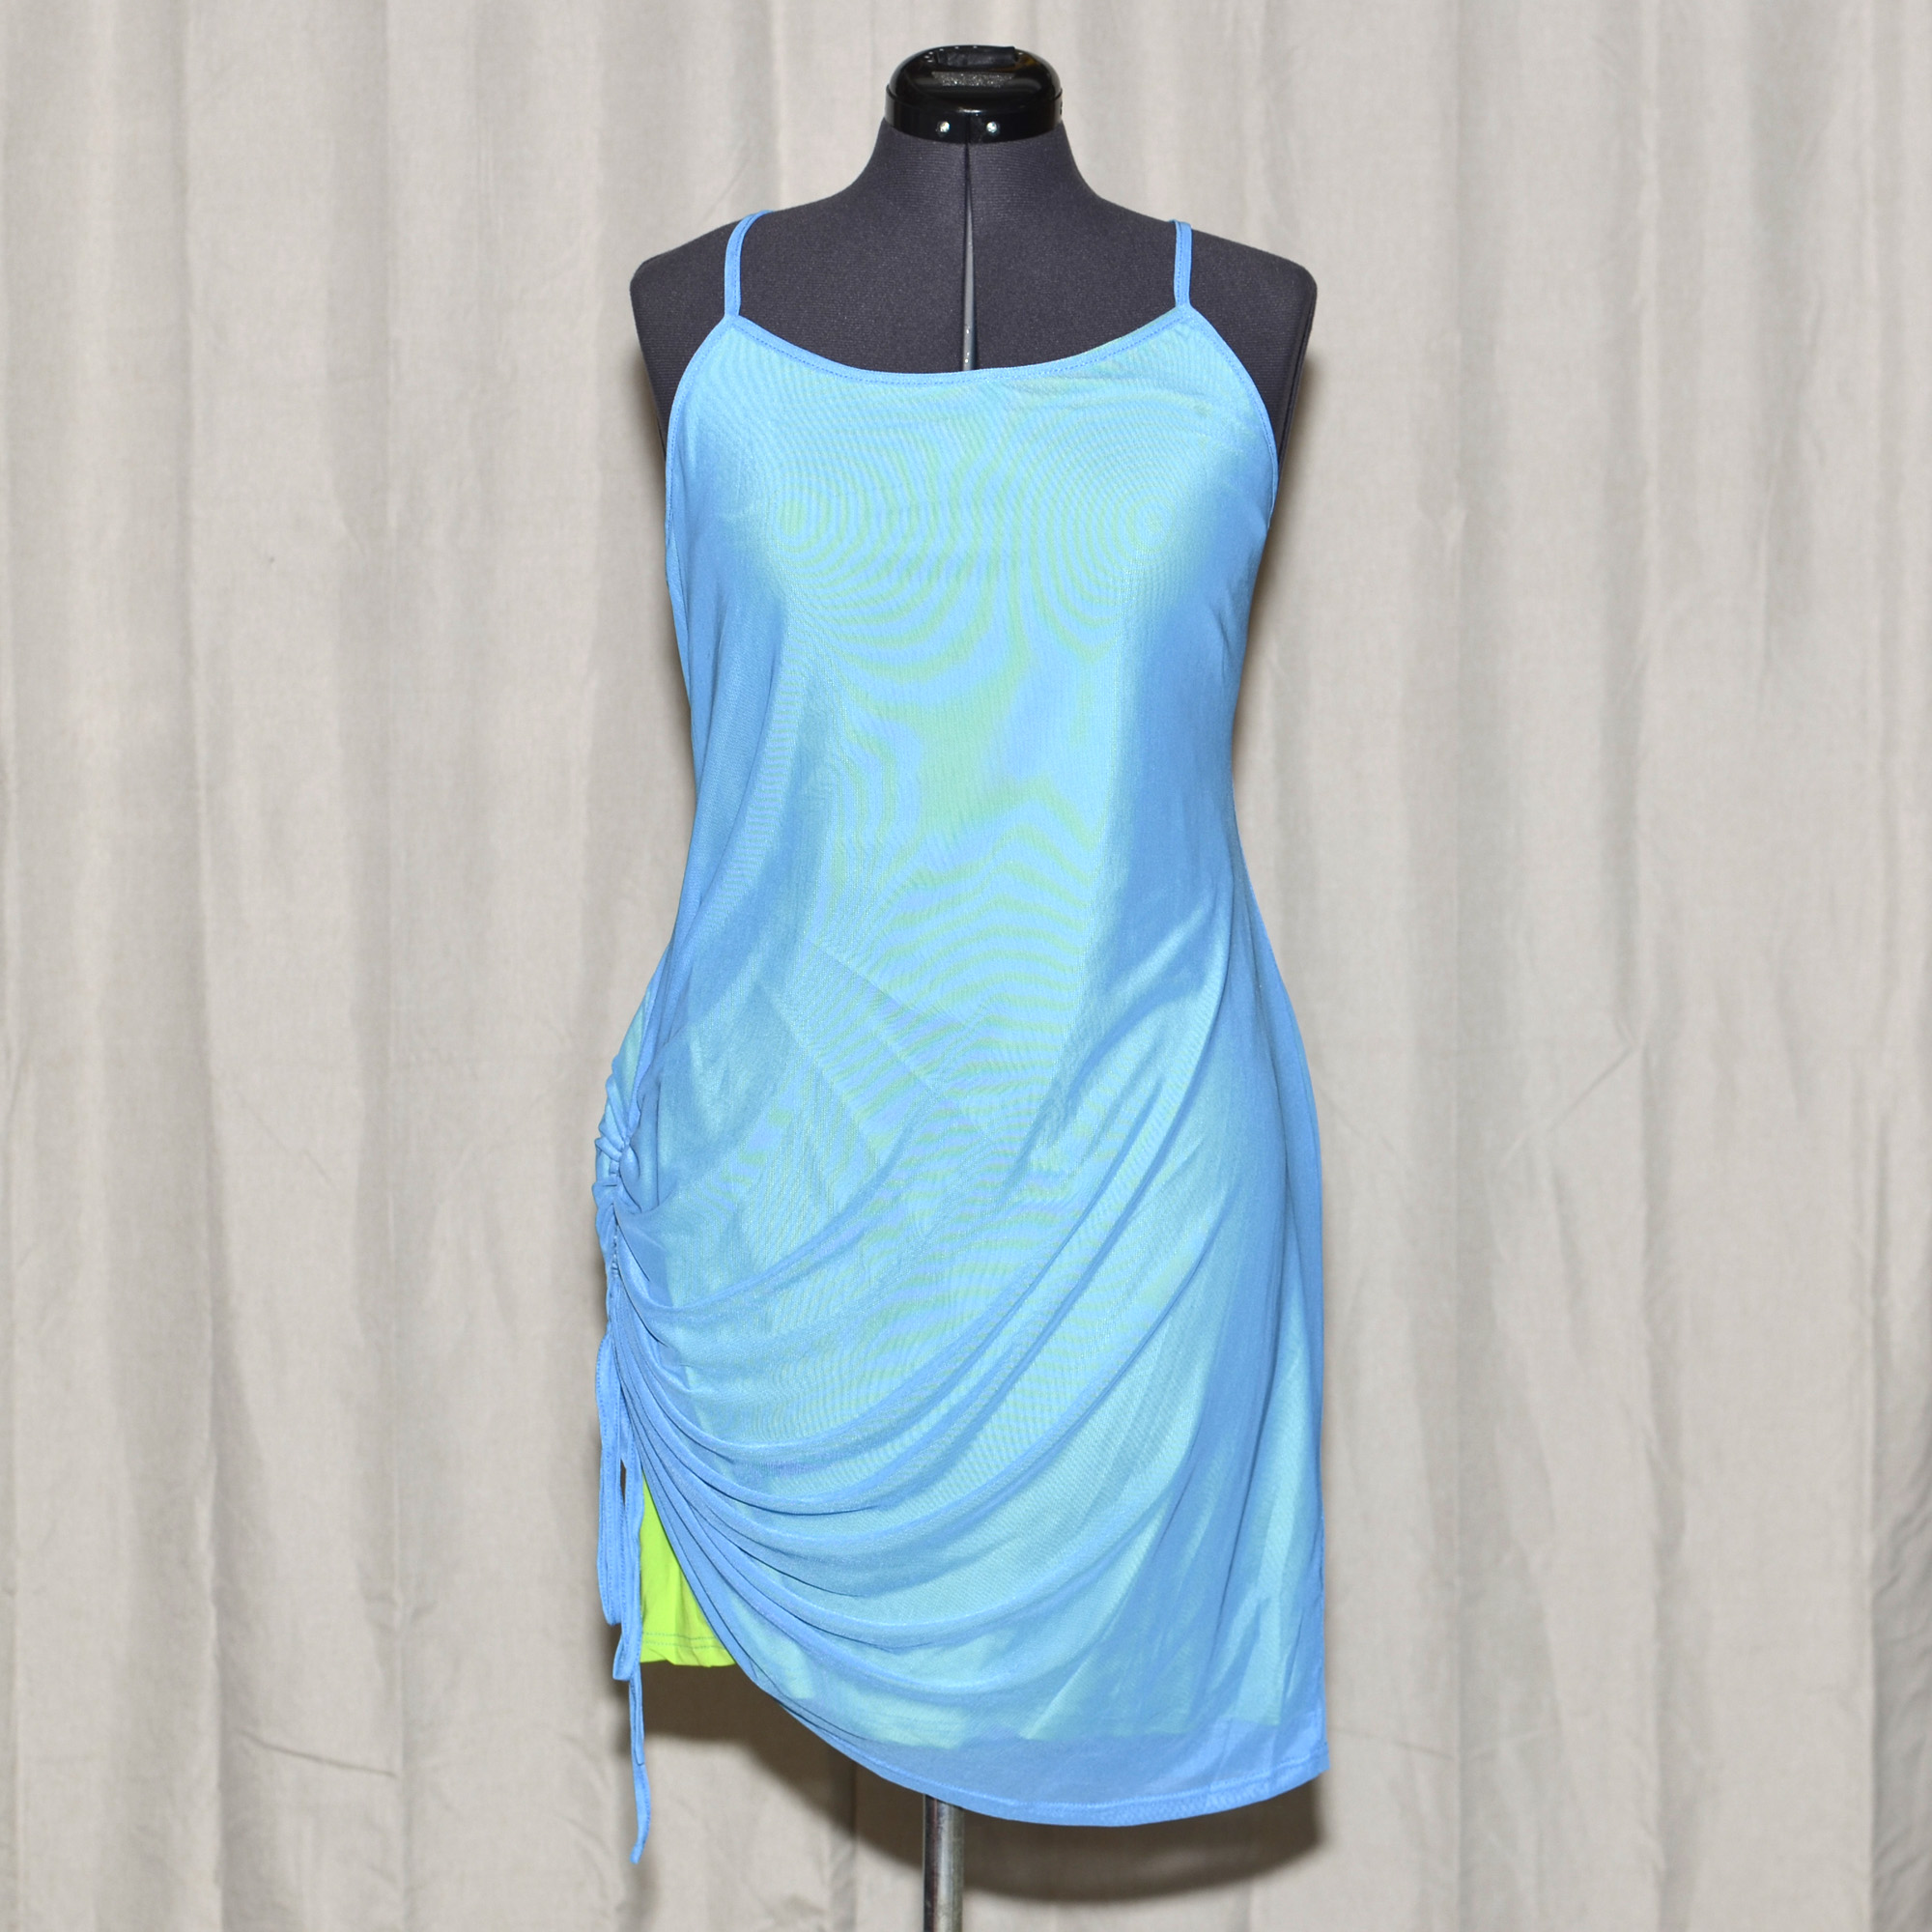 Plus size layered slinky mini dress by Shein. Top layer is vibrant blue mesh, drawn up on one side to expose the neon lime green lining underneath.